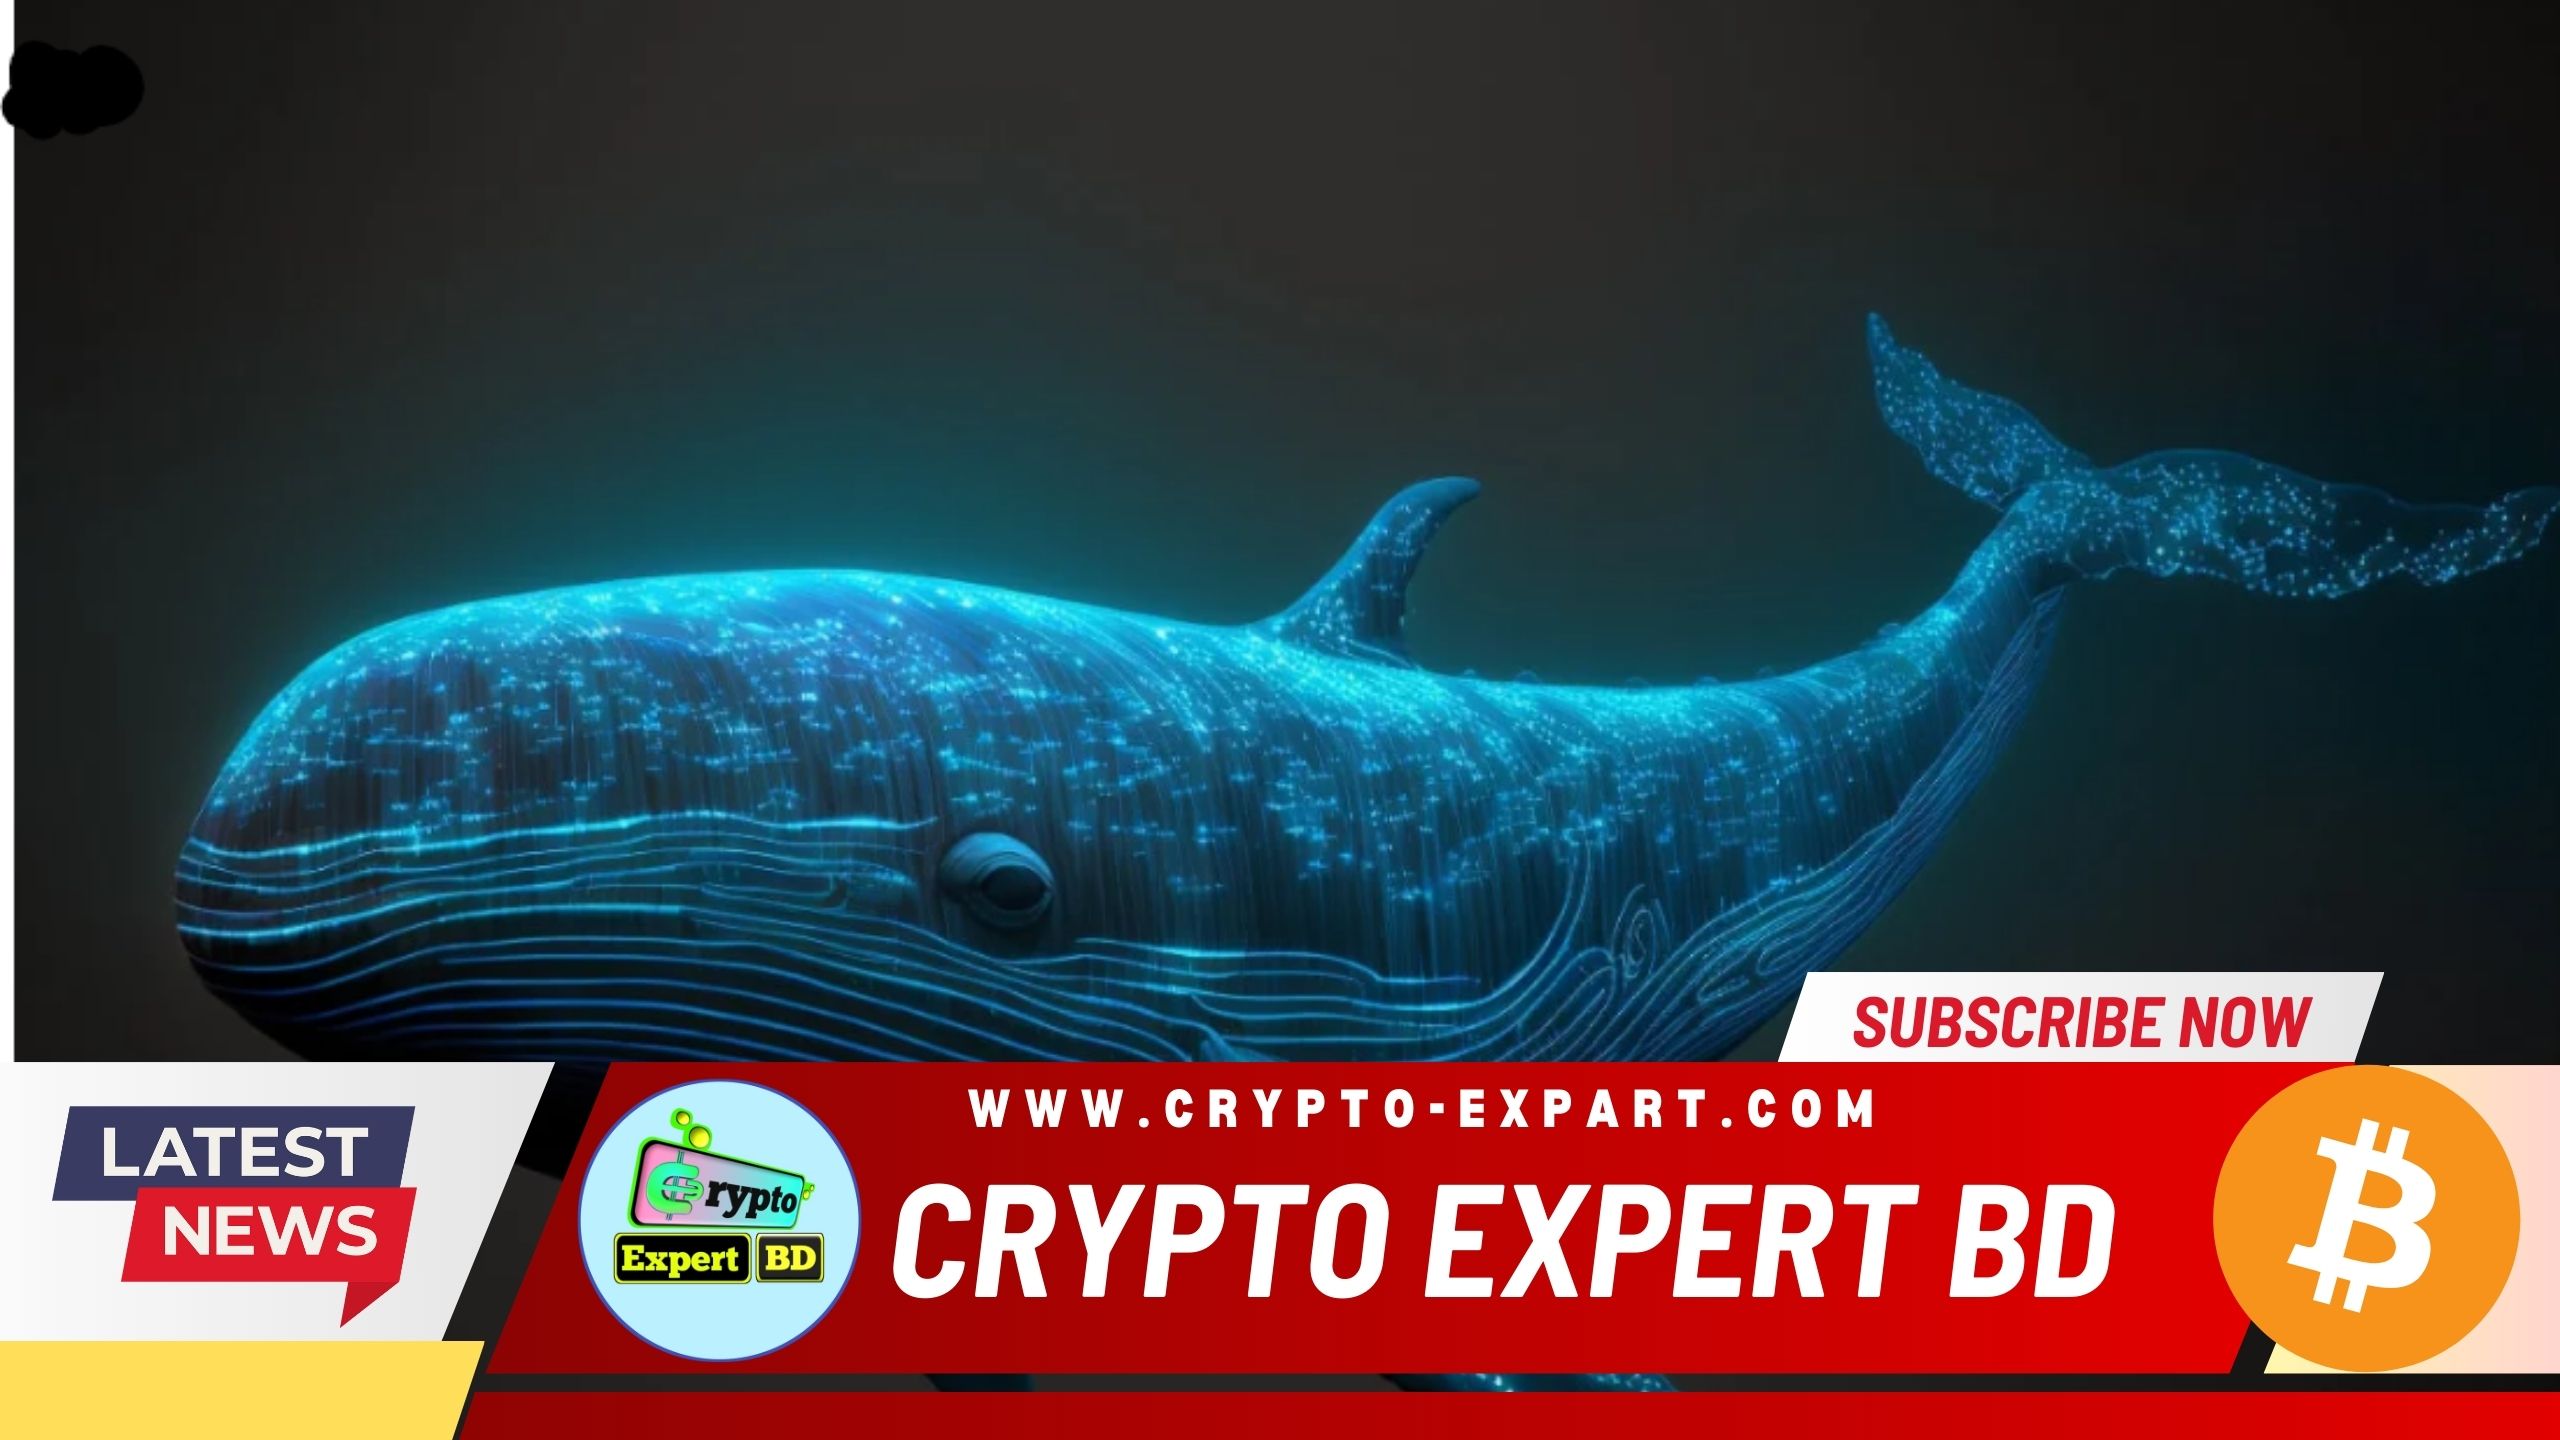 Crypto Whales Show Interest in GFOX, Ethereum (ETH), and XRP as Accumulation Grows